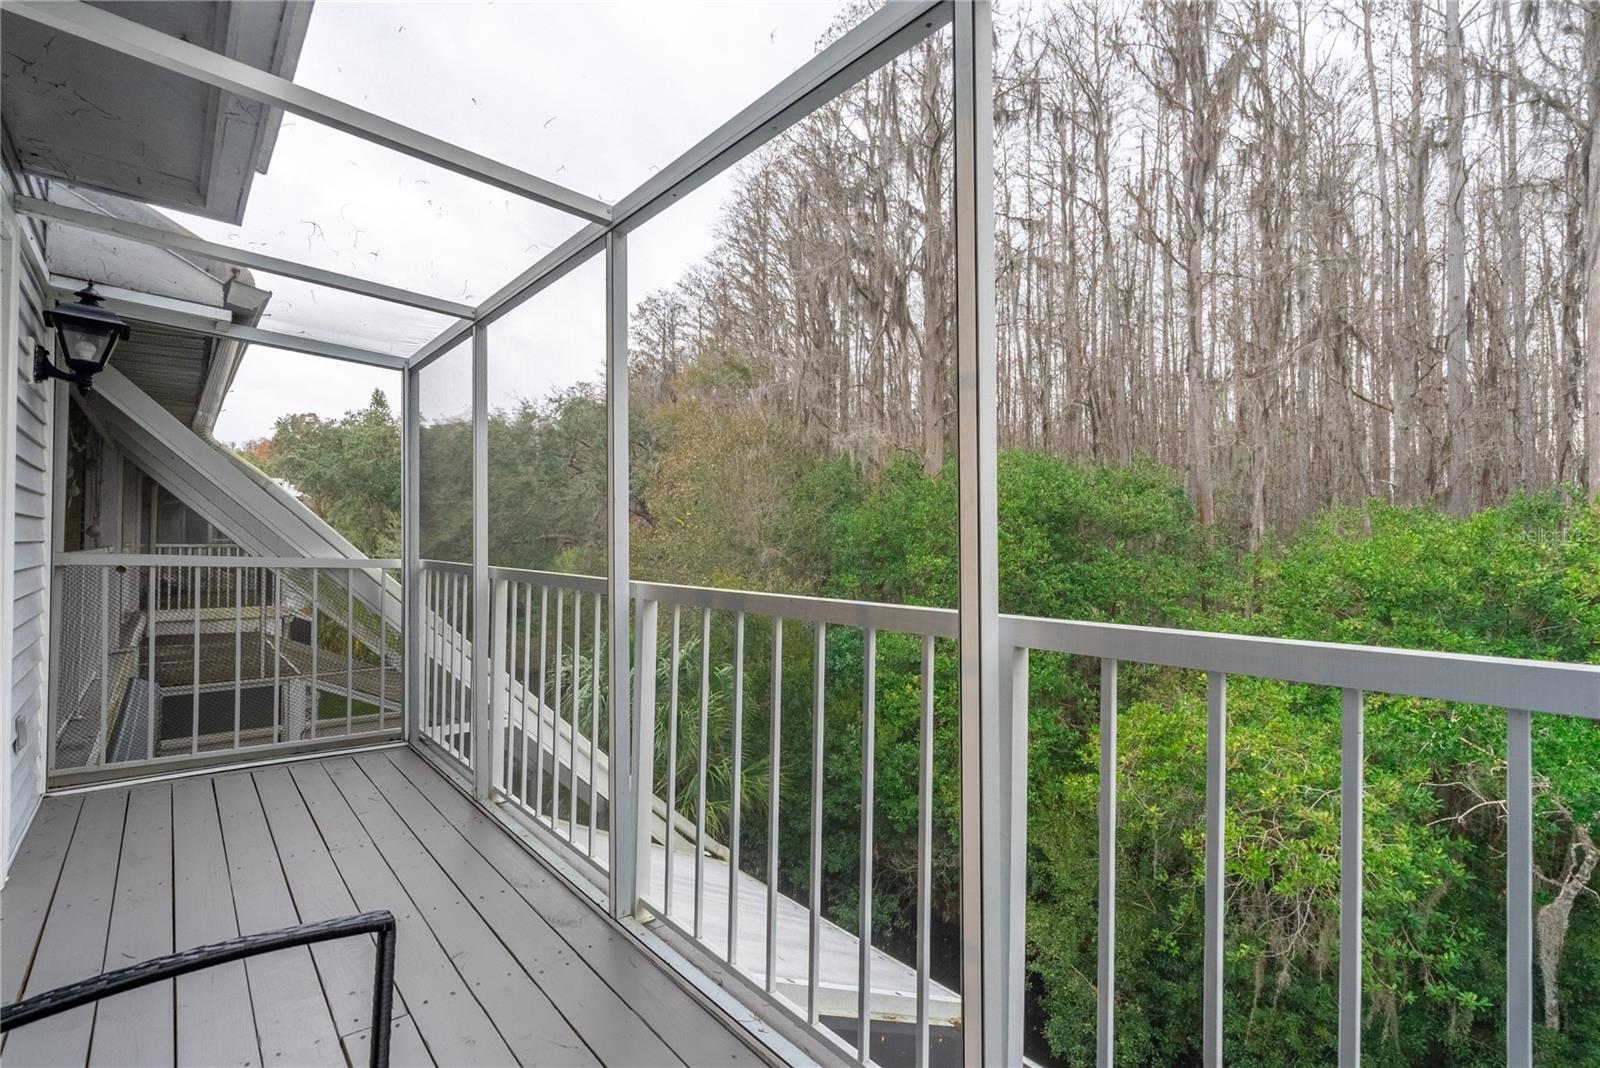 Another angle of the screened in deck that overlooks the creek. This is one of five balconies at this condo.